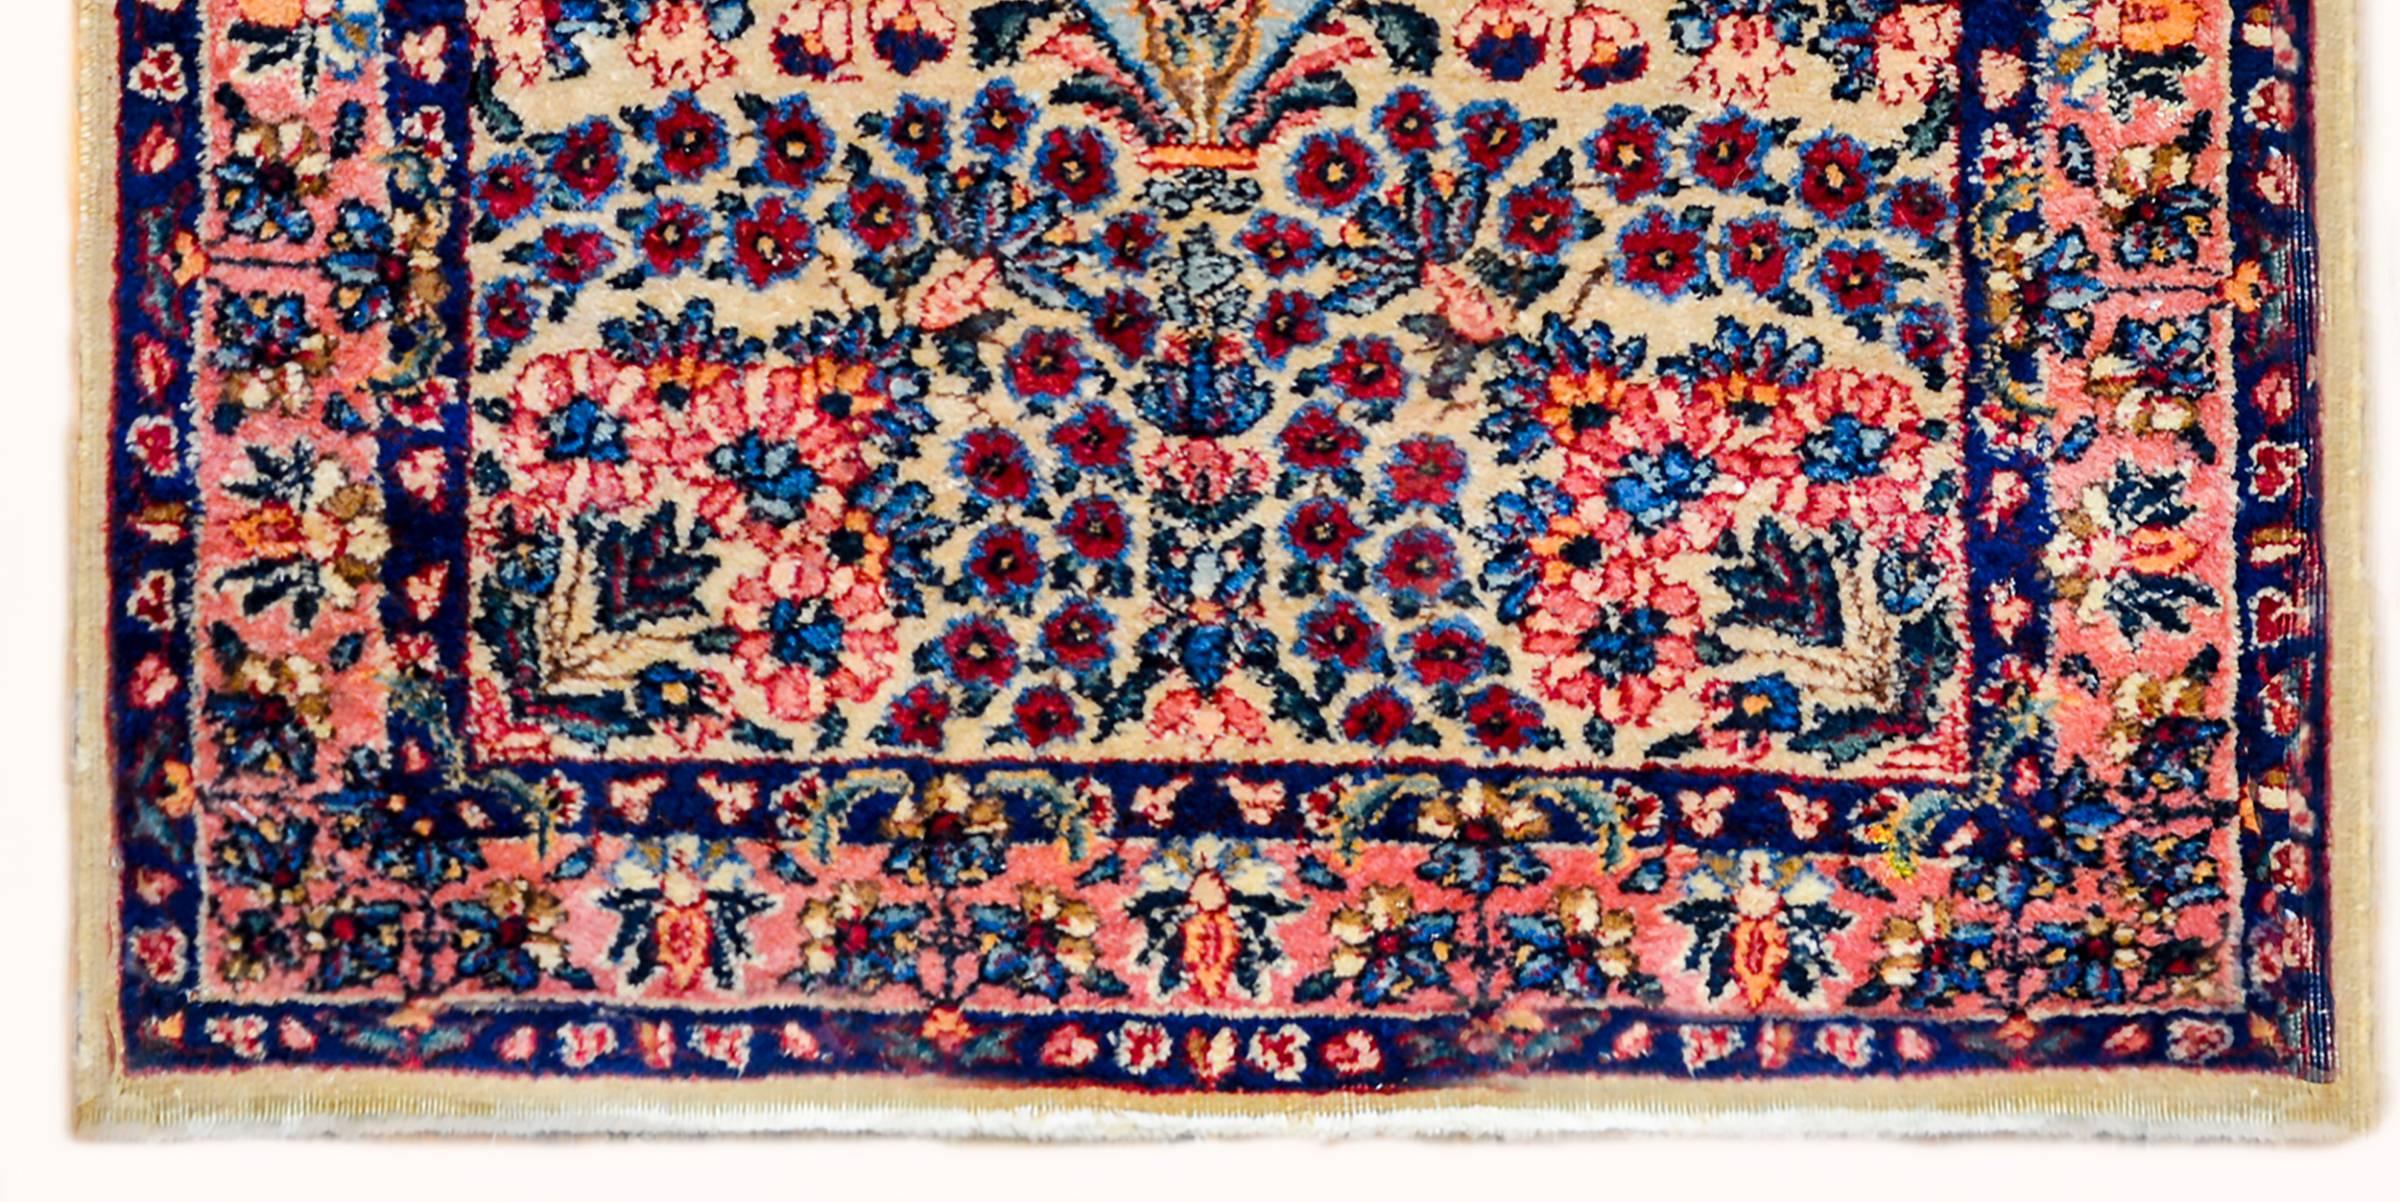 A beautiful early 20th century Persian Lavar Kirman prayer rug with a wonderful densely woven tree-of-life containing myriad variety blossoming flowers amidst a field. The border is typical, with a densely woven floral and leaf pattern, flanked by